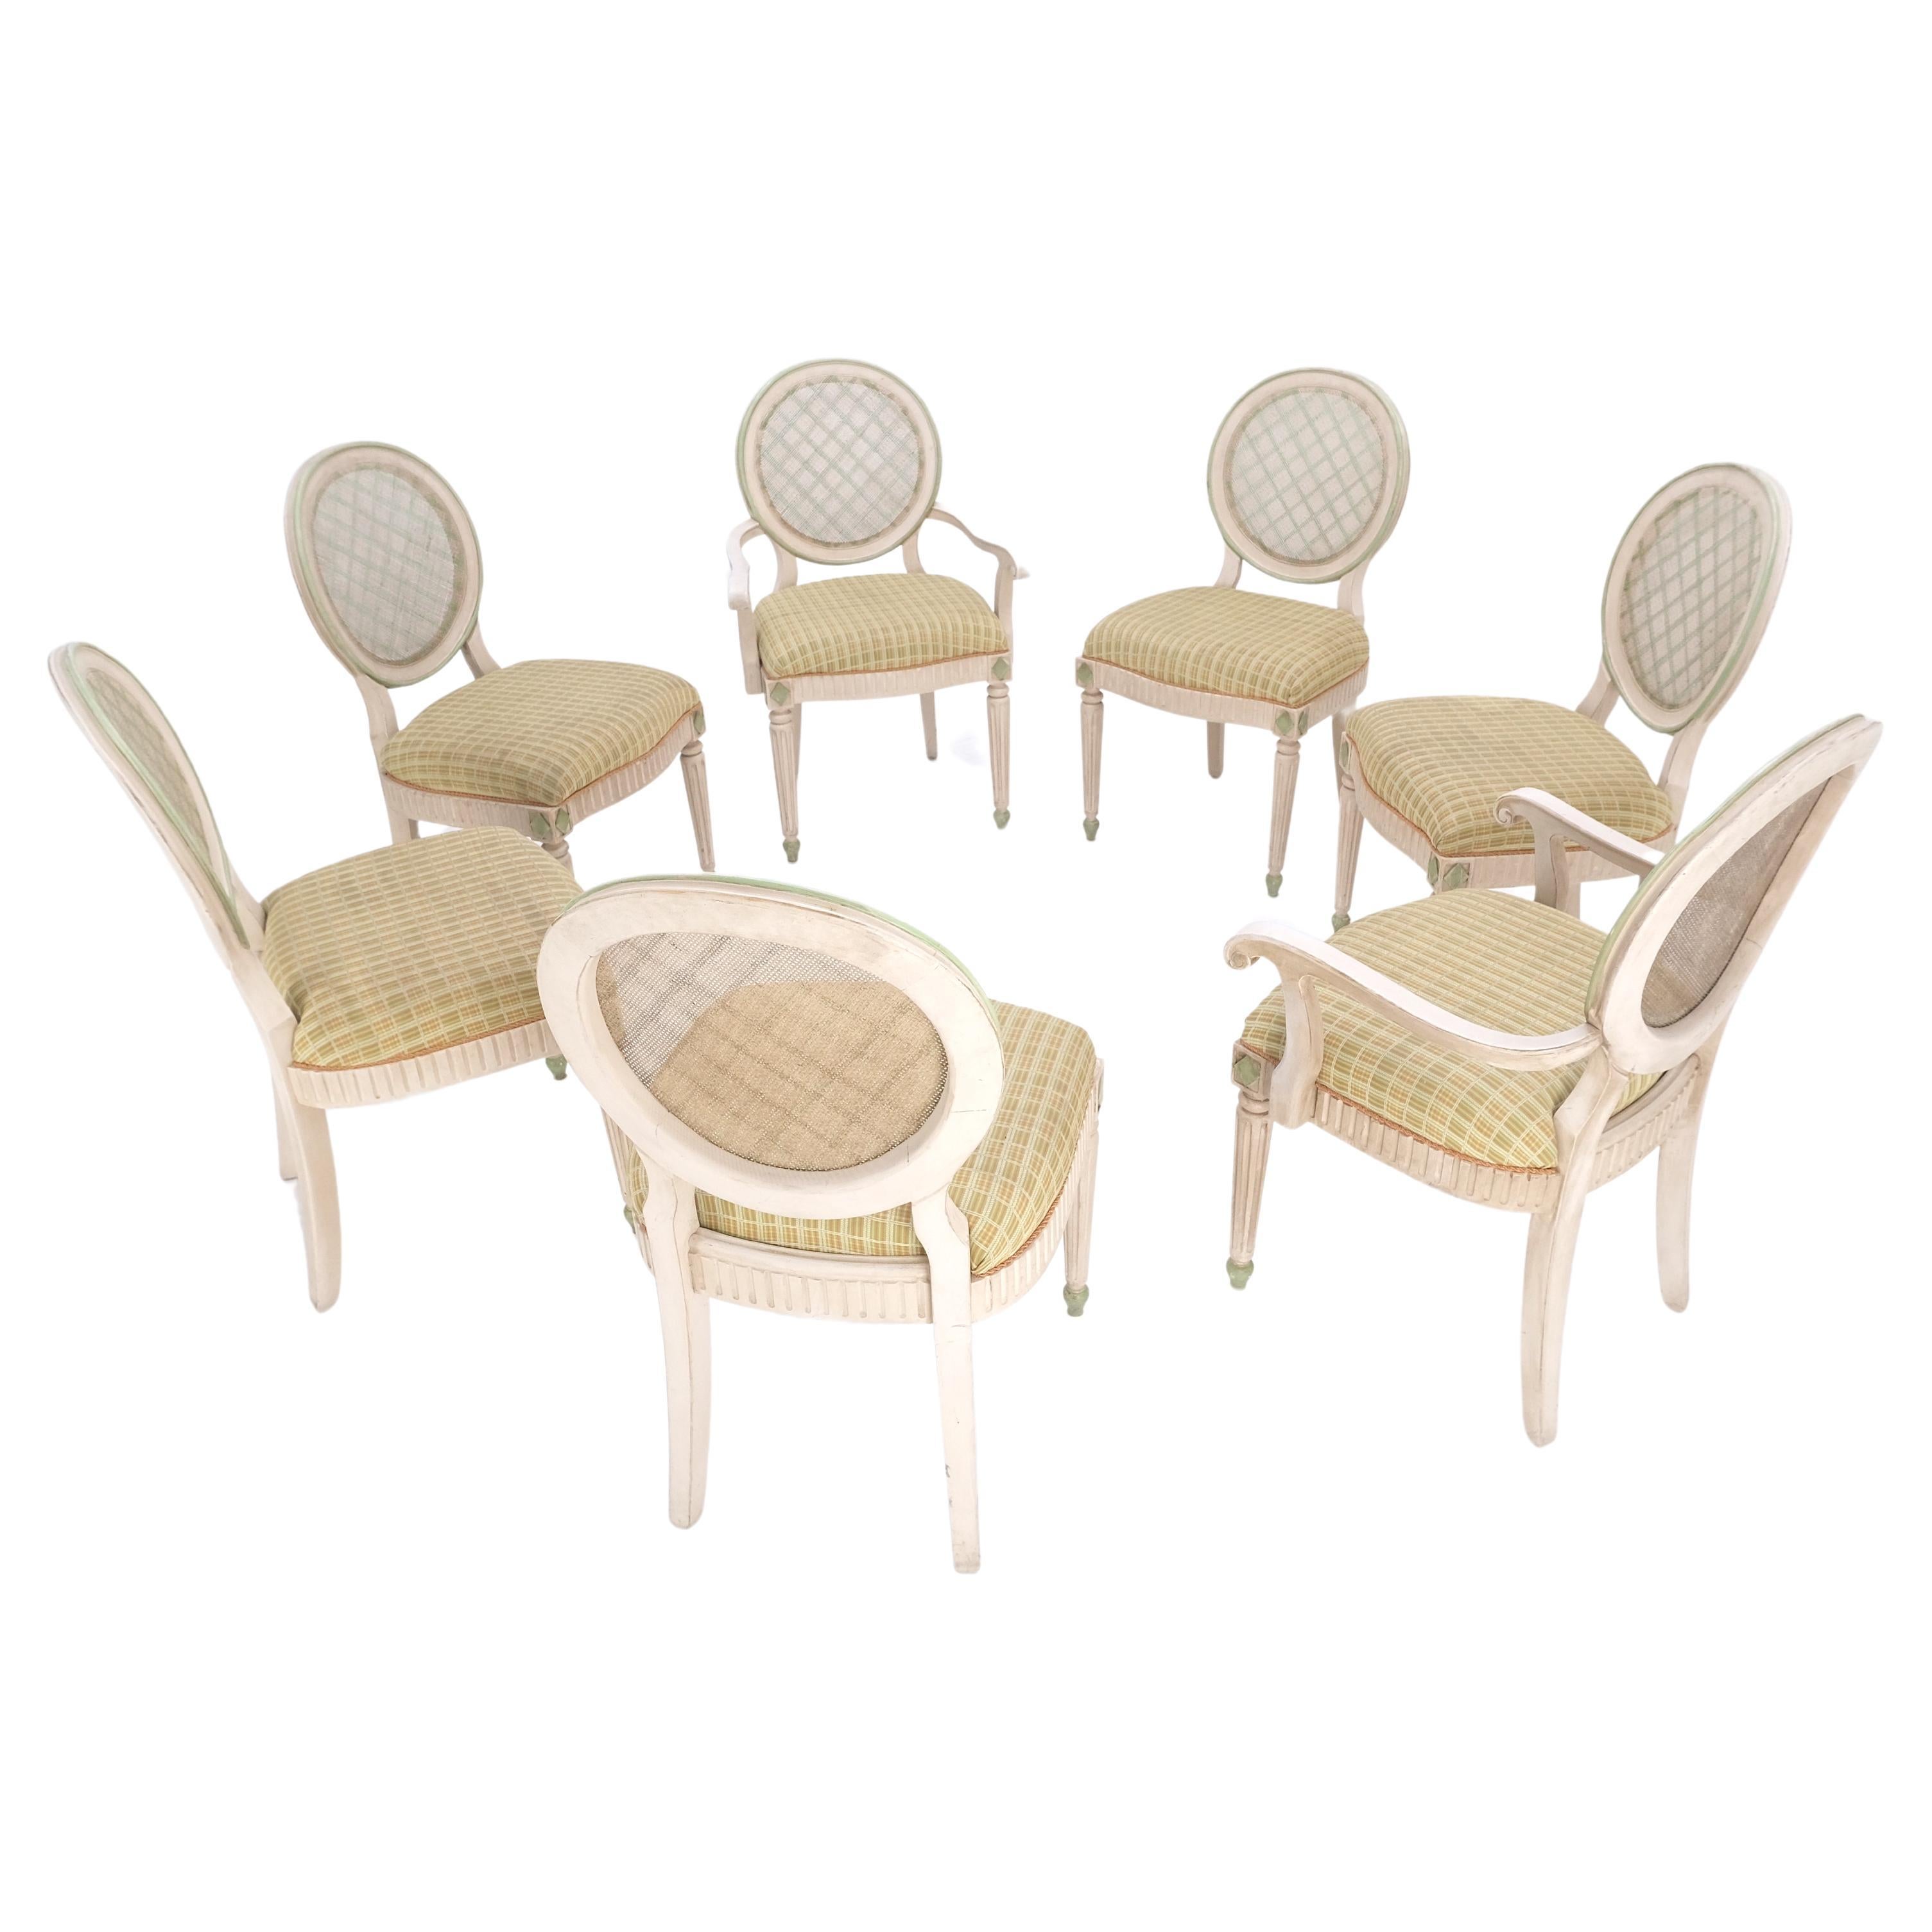 Set of 7 Swedish White Wash Paint Decorated Oval Cane Backs Fluted Legs Dining Chairs NICE!